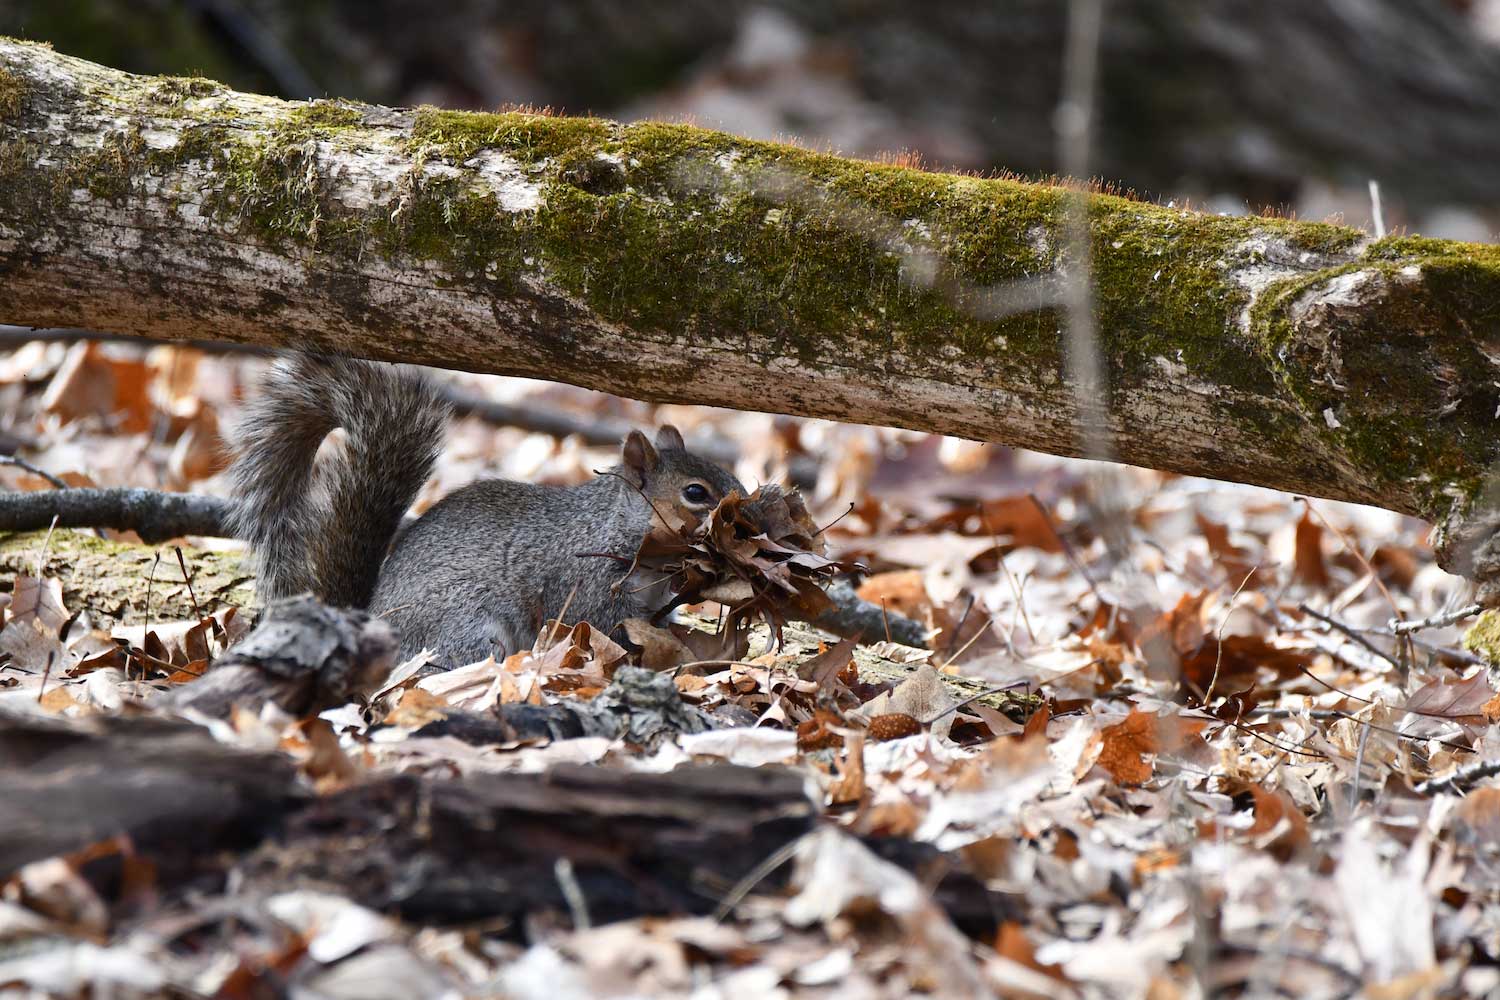 A gray squirrel carrying a mouthful of fallen leaves as it moves under a fallen tree branch on a ground covered with fallen leaves.